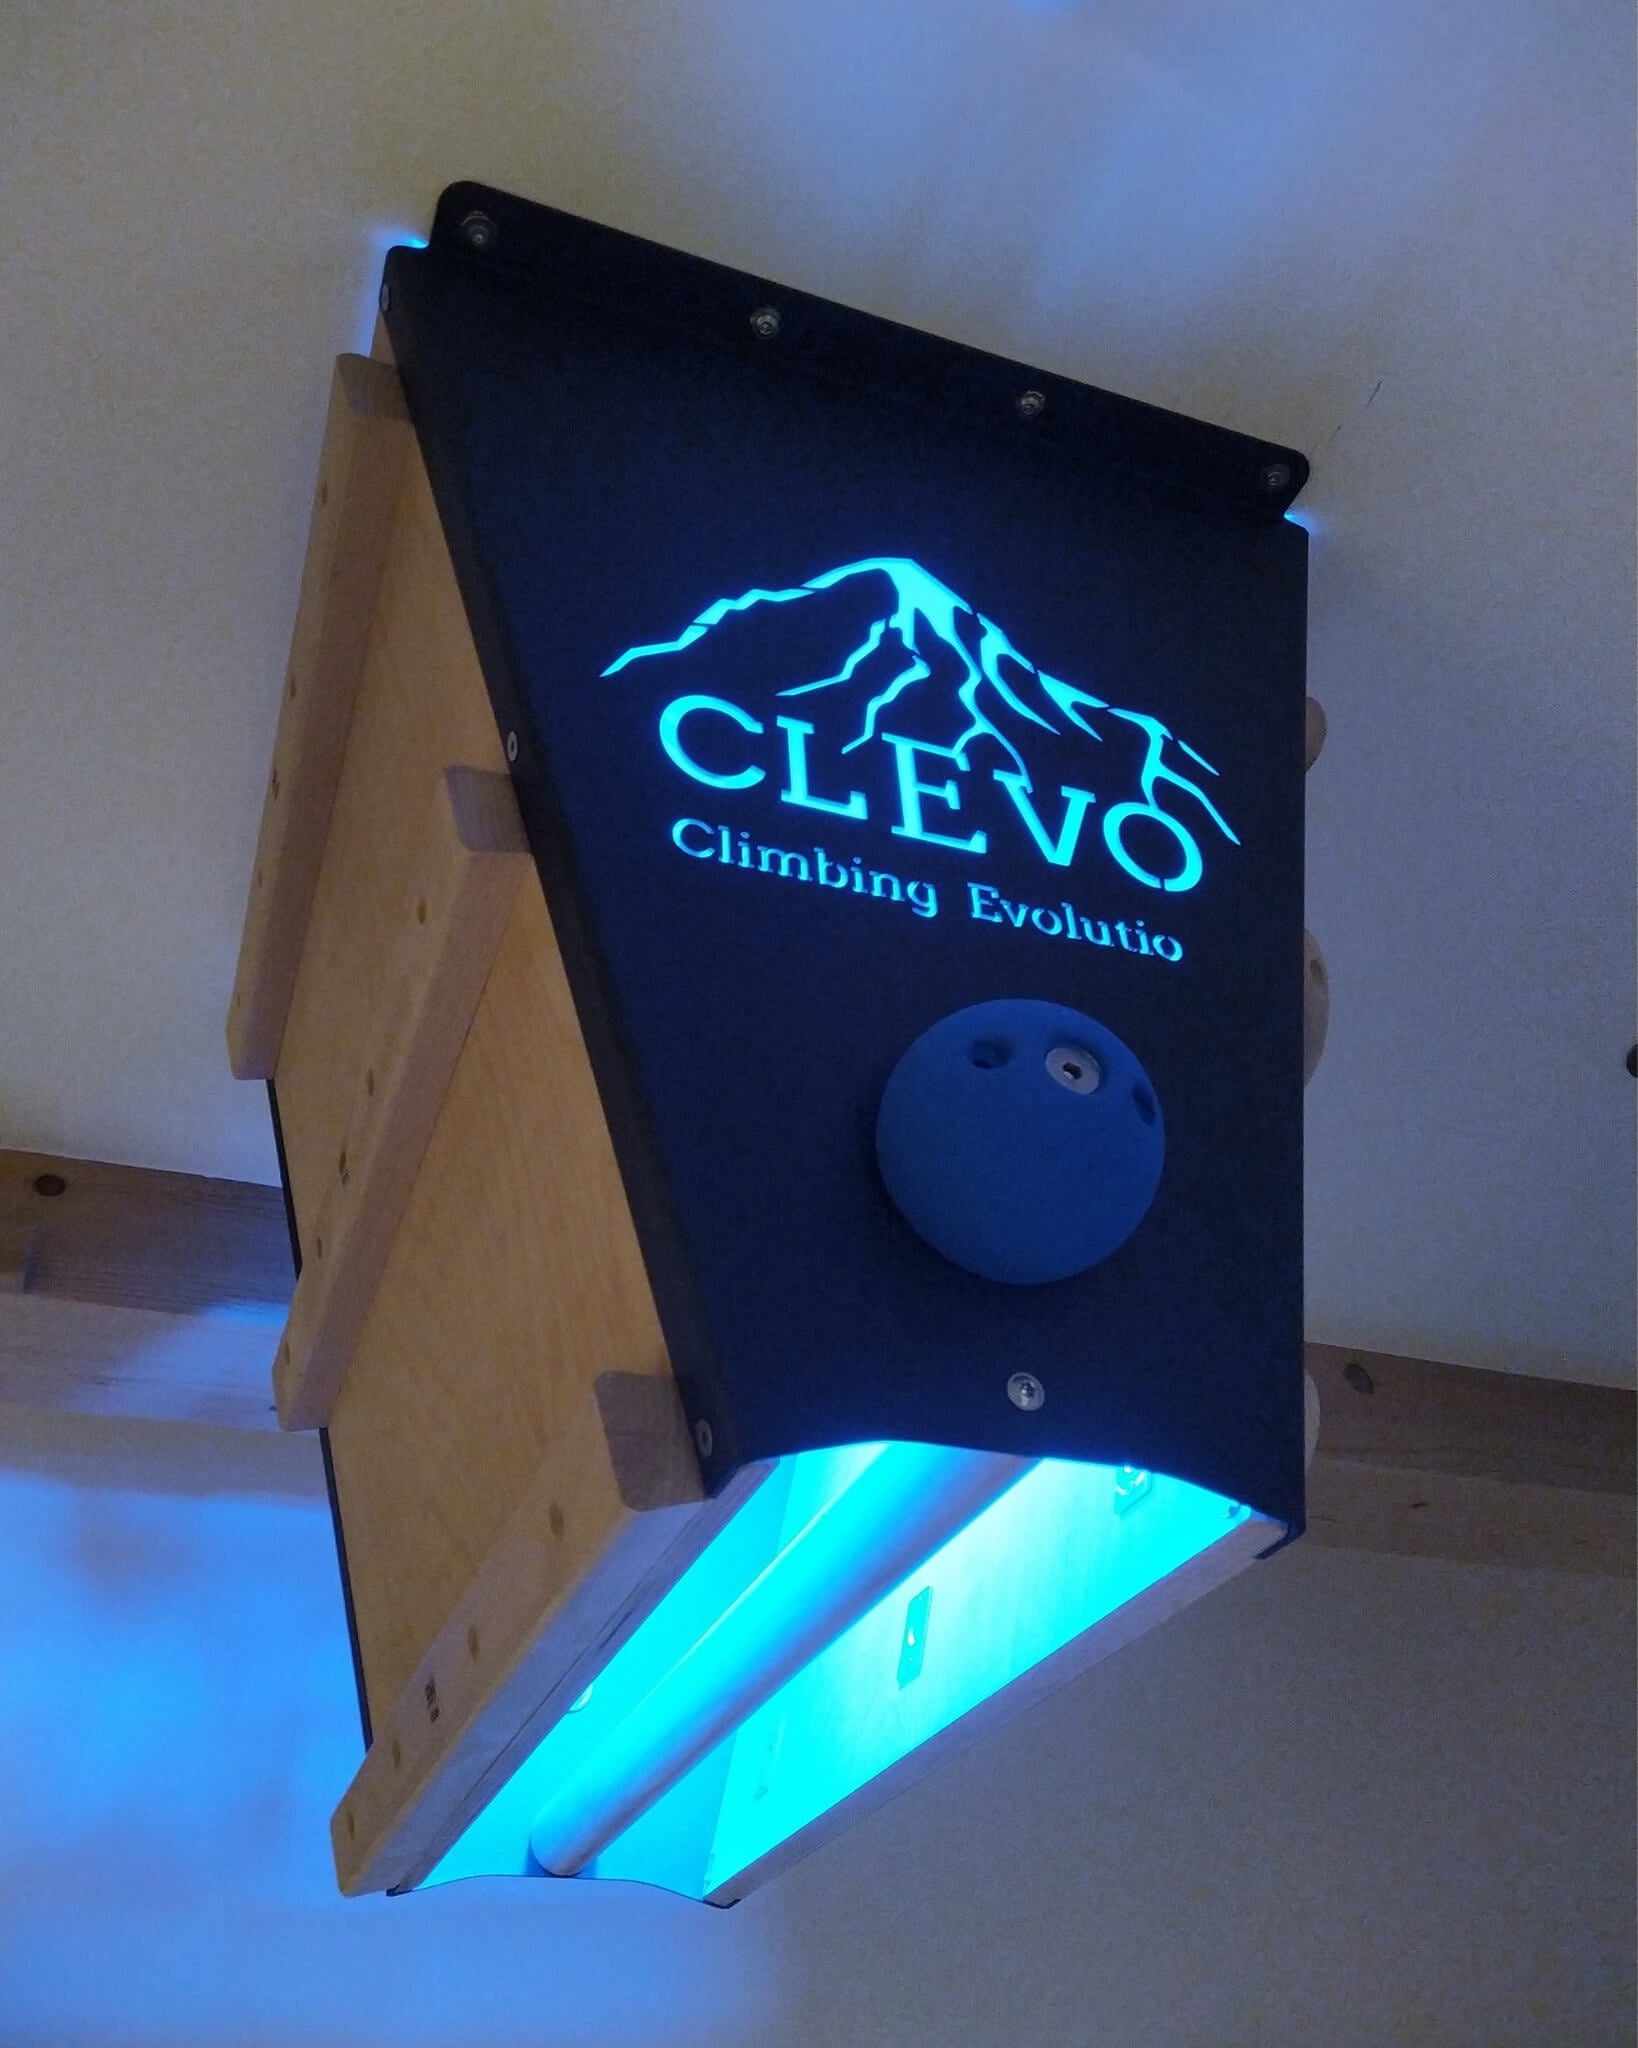 CLEVO L: Ceiling mount campus board, climbing handles and pull-up bar